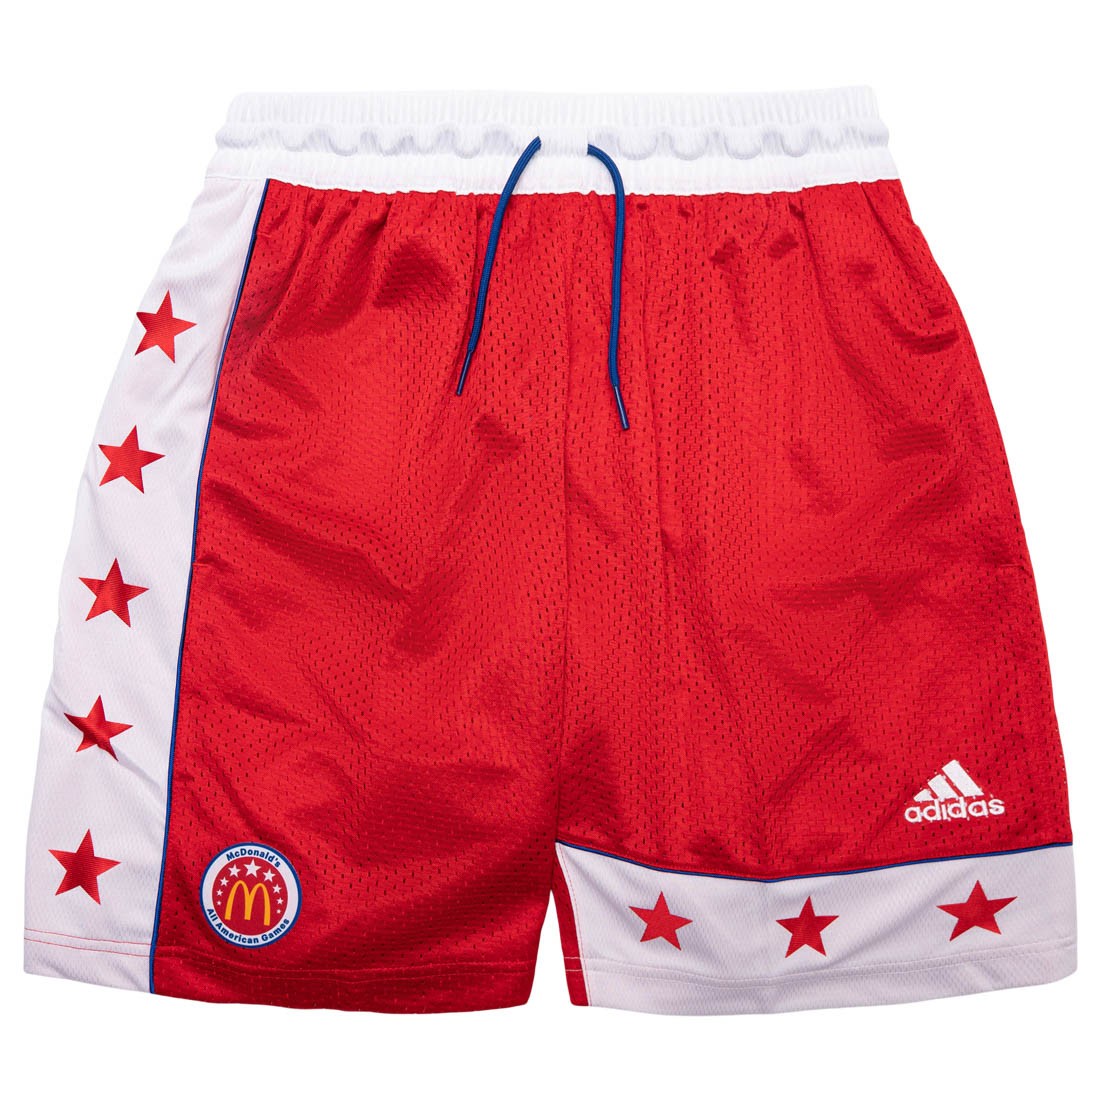 Adidas Men McDonald's All American Game OS Shorts red white